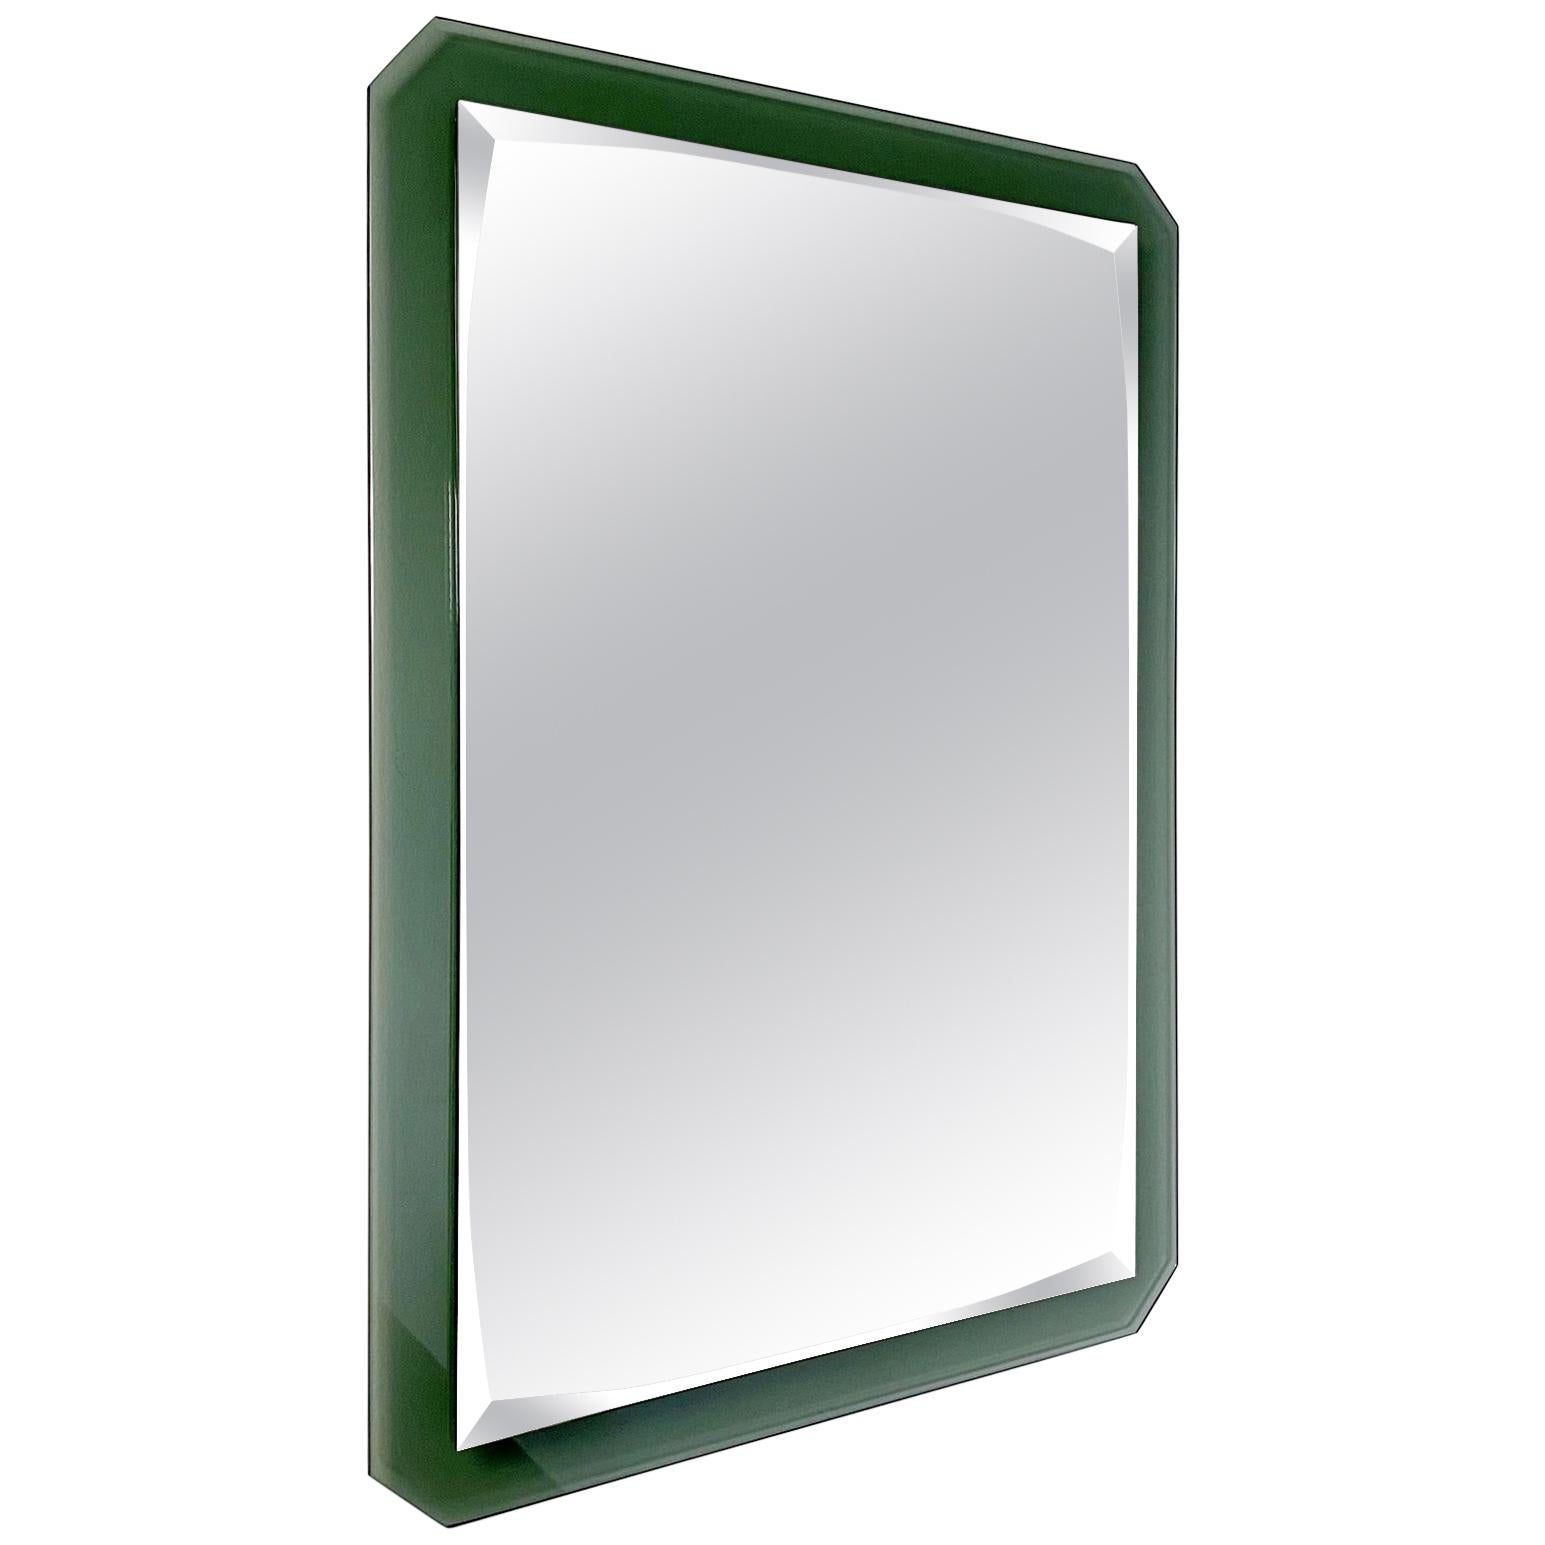 Midcentury Cristal Art Rectangular Green Glass Faceted Wall Mirror, 1960s, Italy